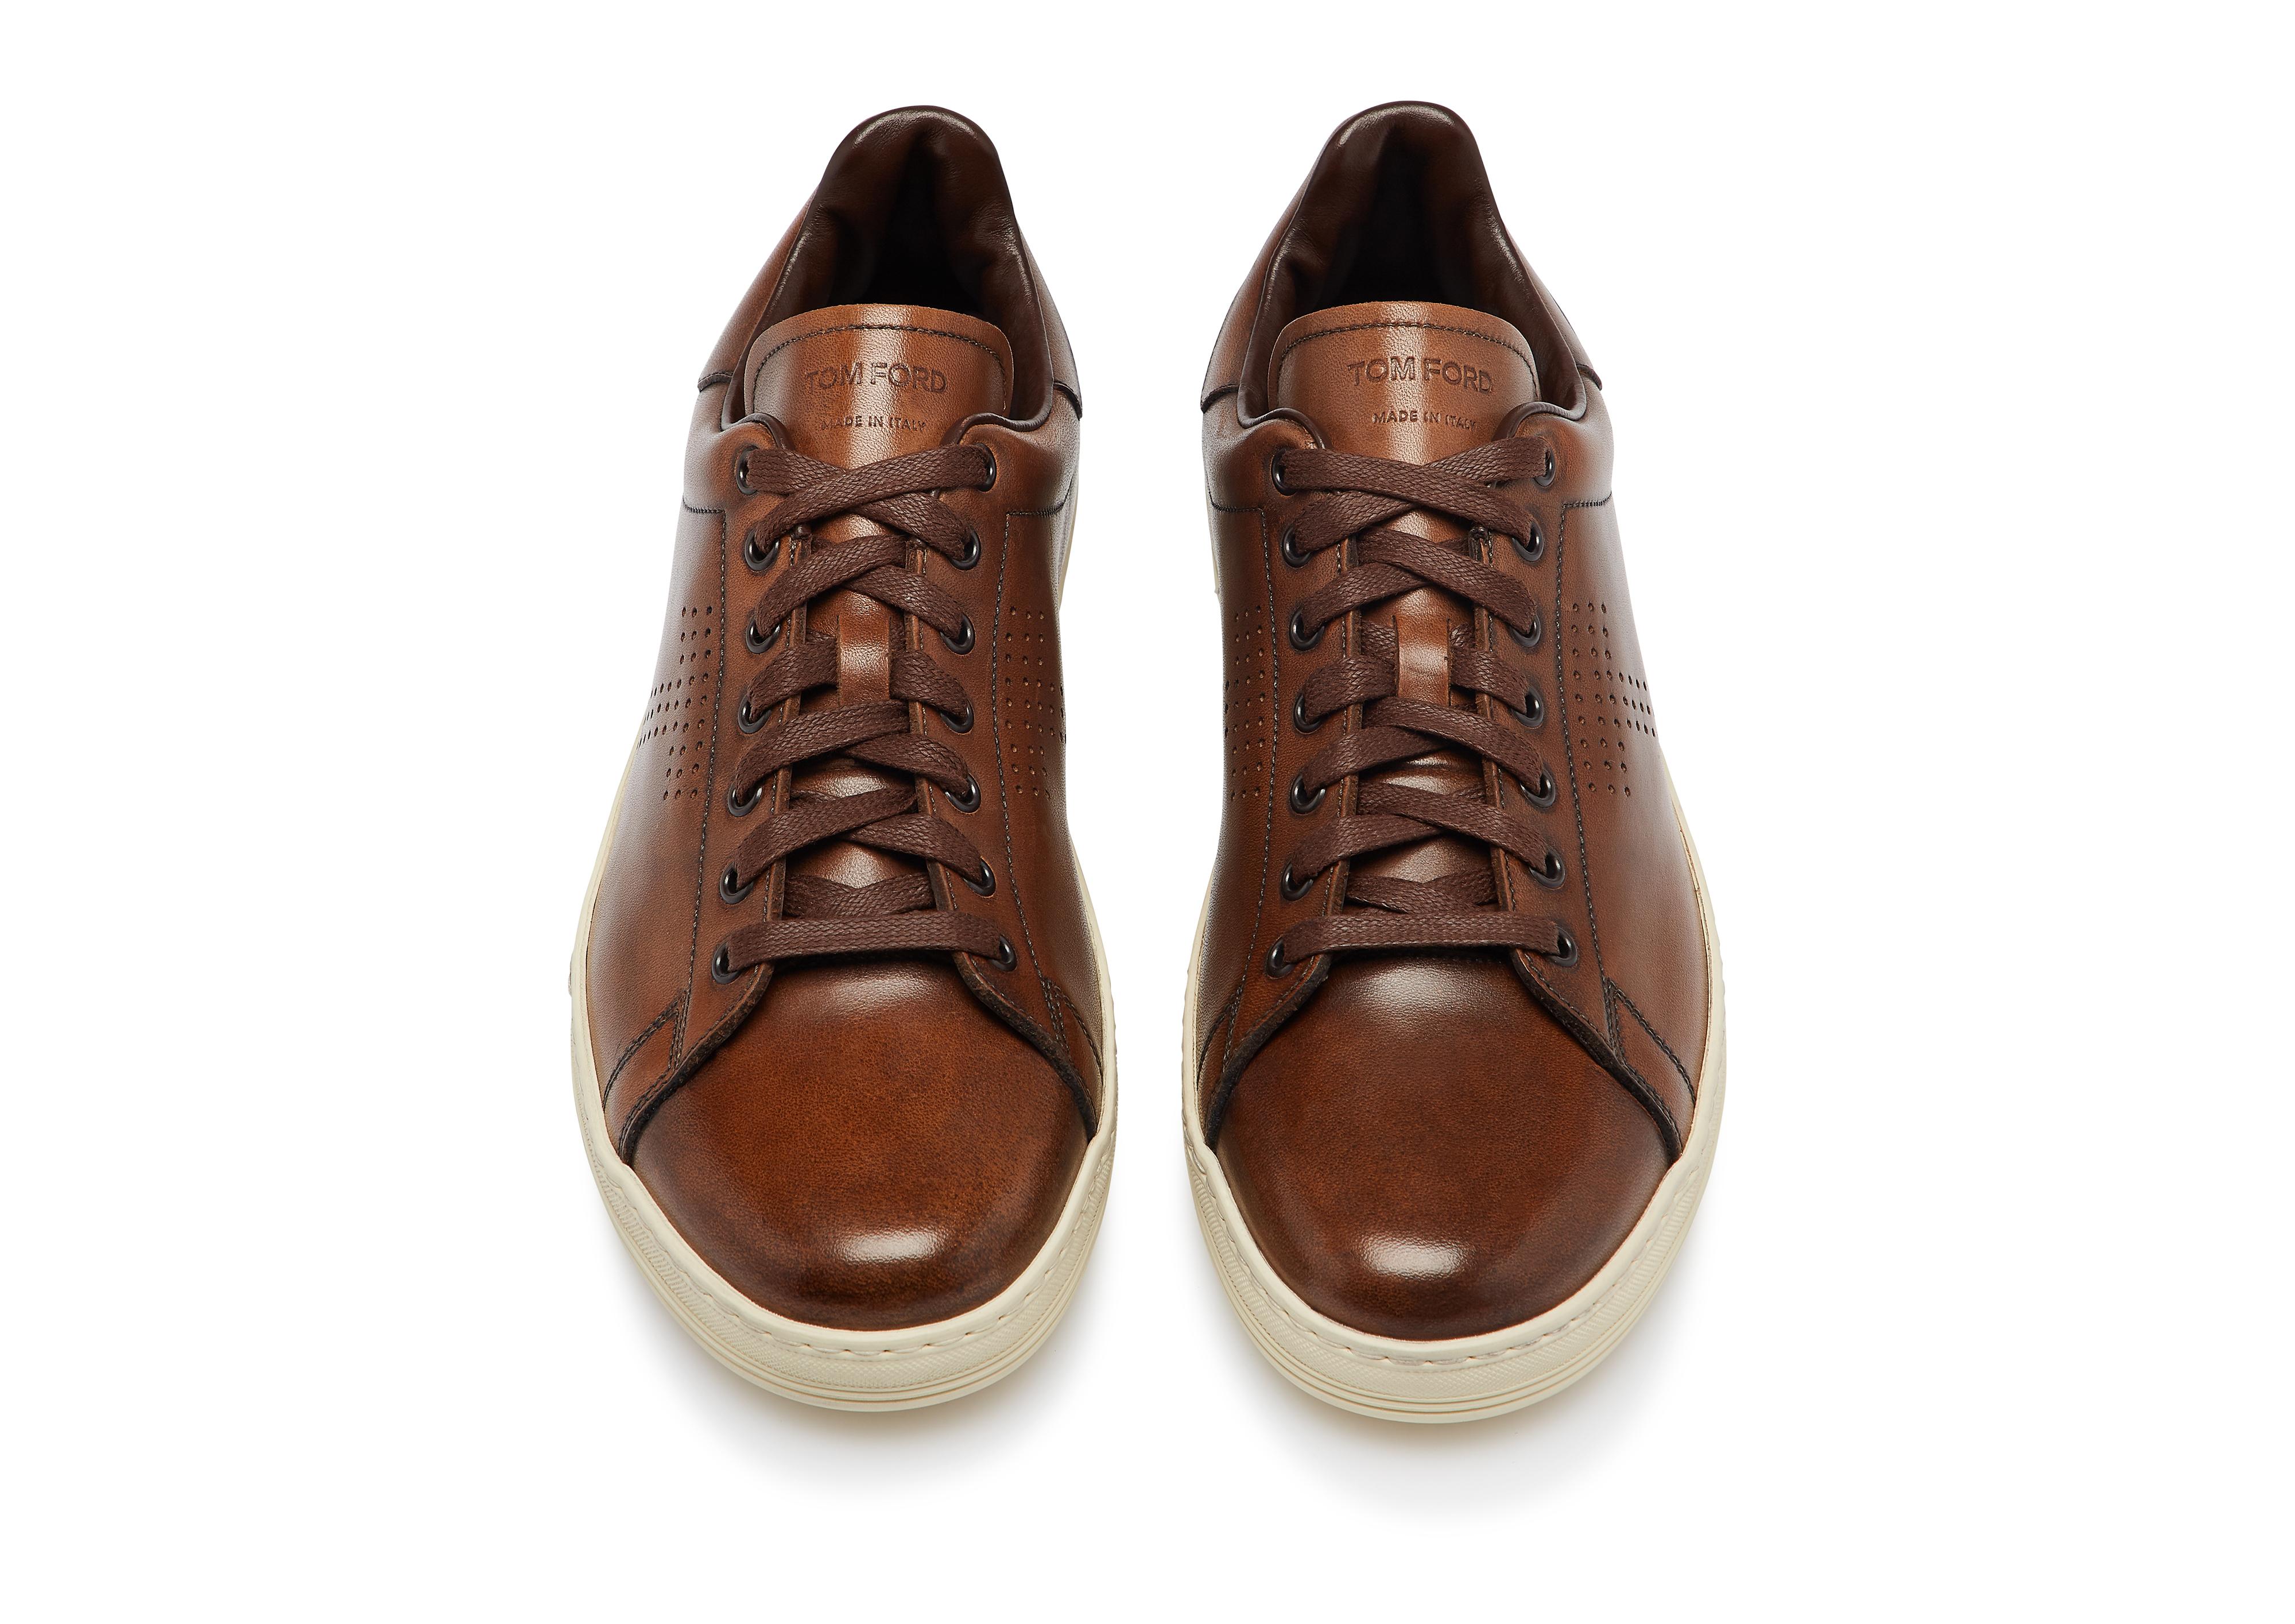 TOM FORD WARWICK BURNISHED LEATHER SNEAKERS, SIGARO | ModeSens